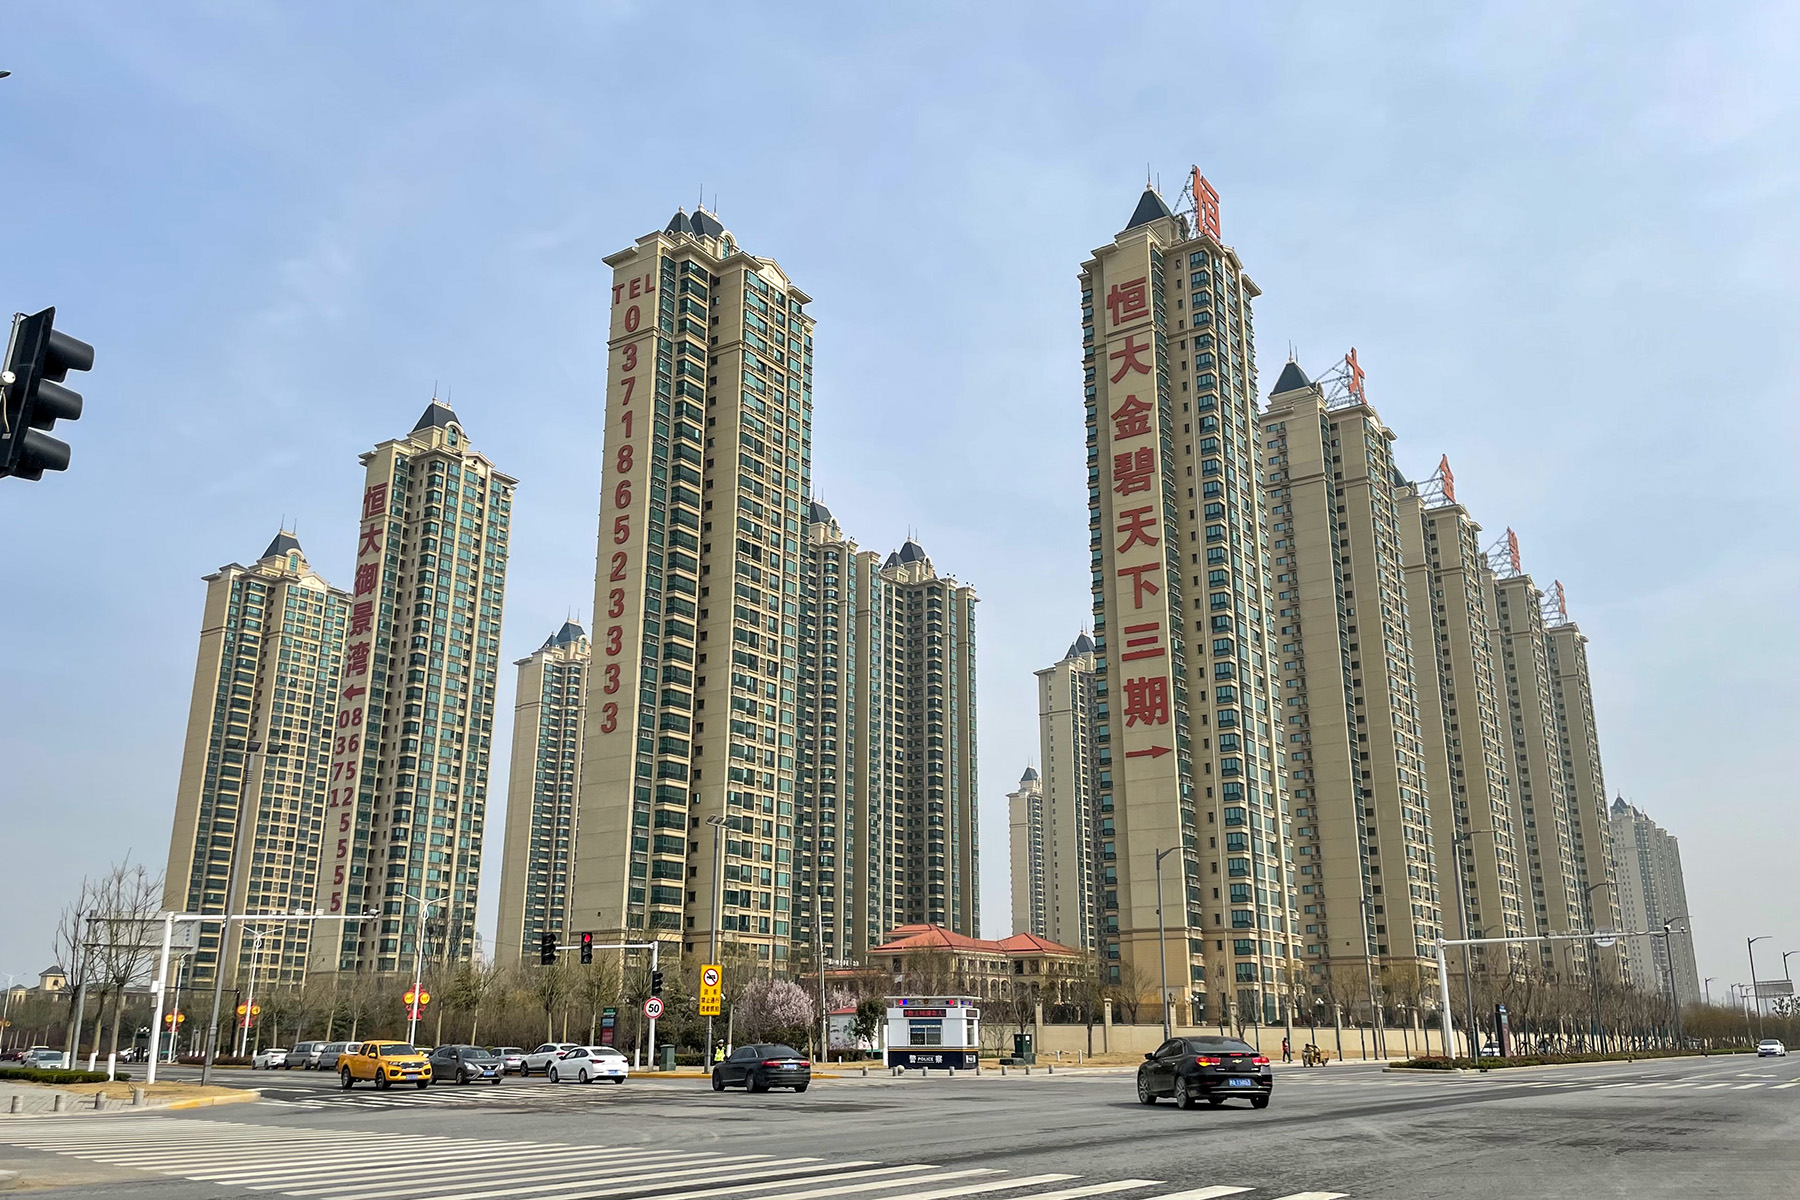 Residential buildings developed by Evergrande Images Windmemories Wikimedia Commons